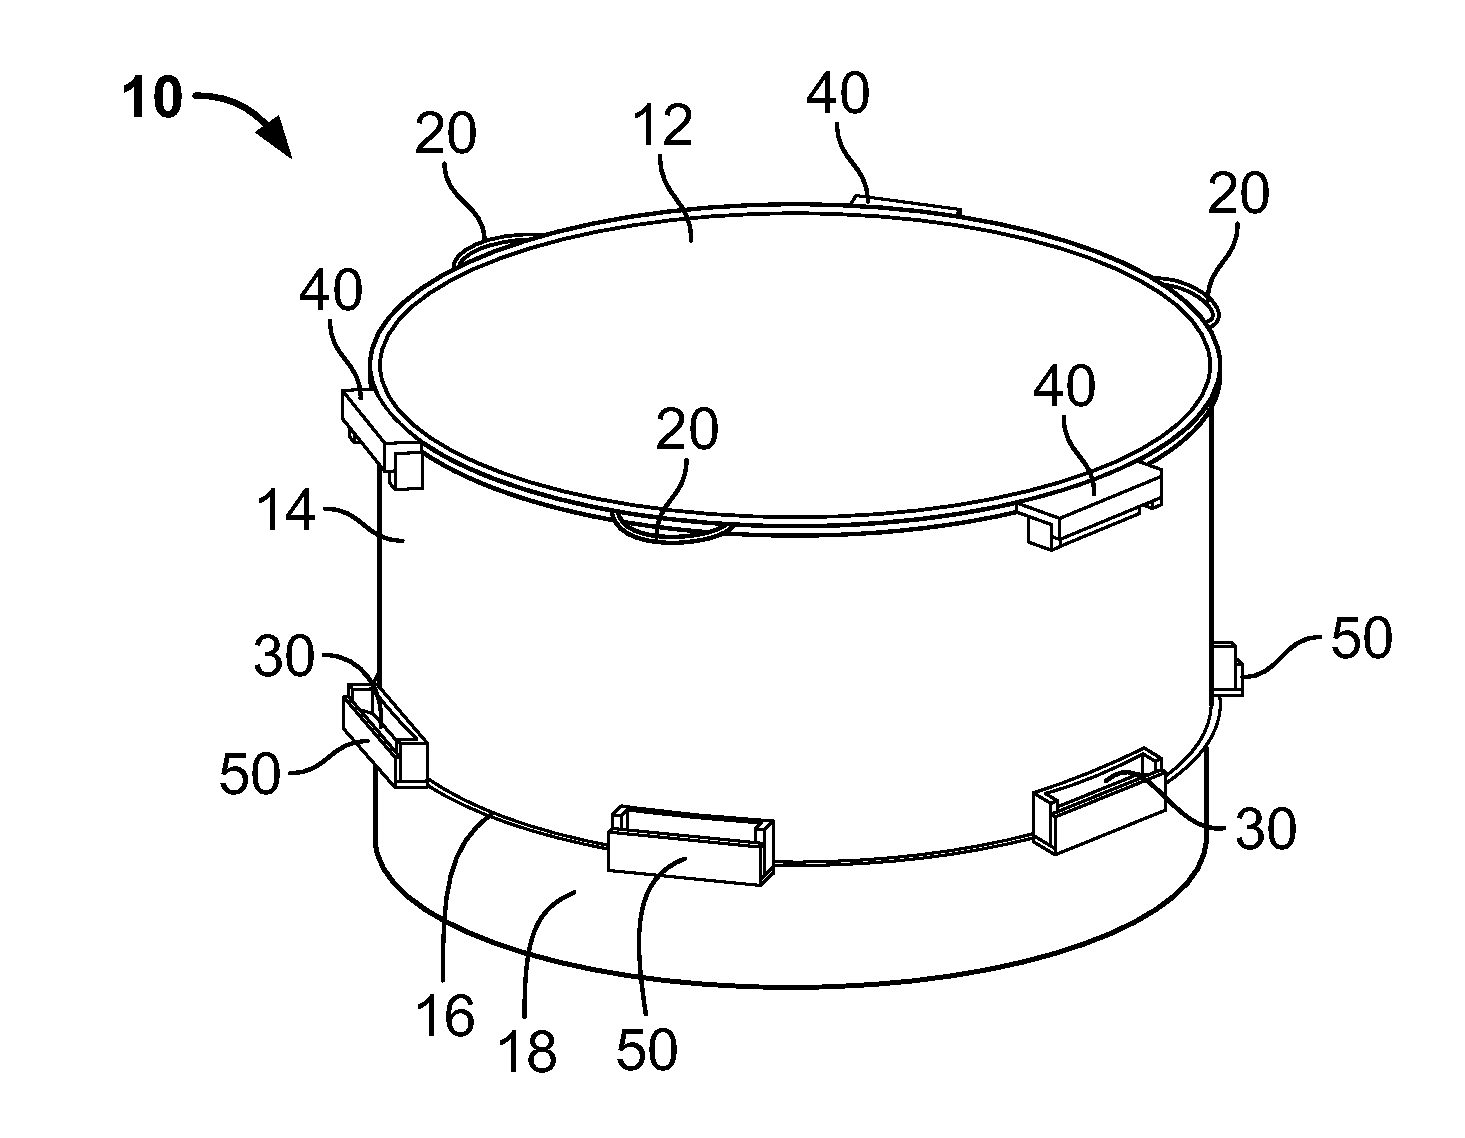 Multi-Part Sifter for De-Seeding and Sorting Plant Material